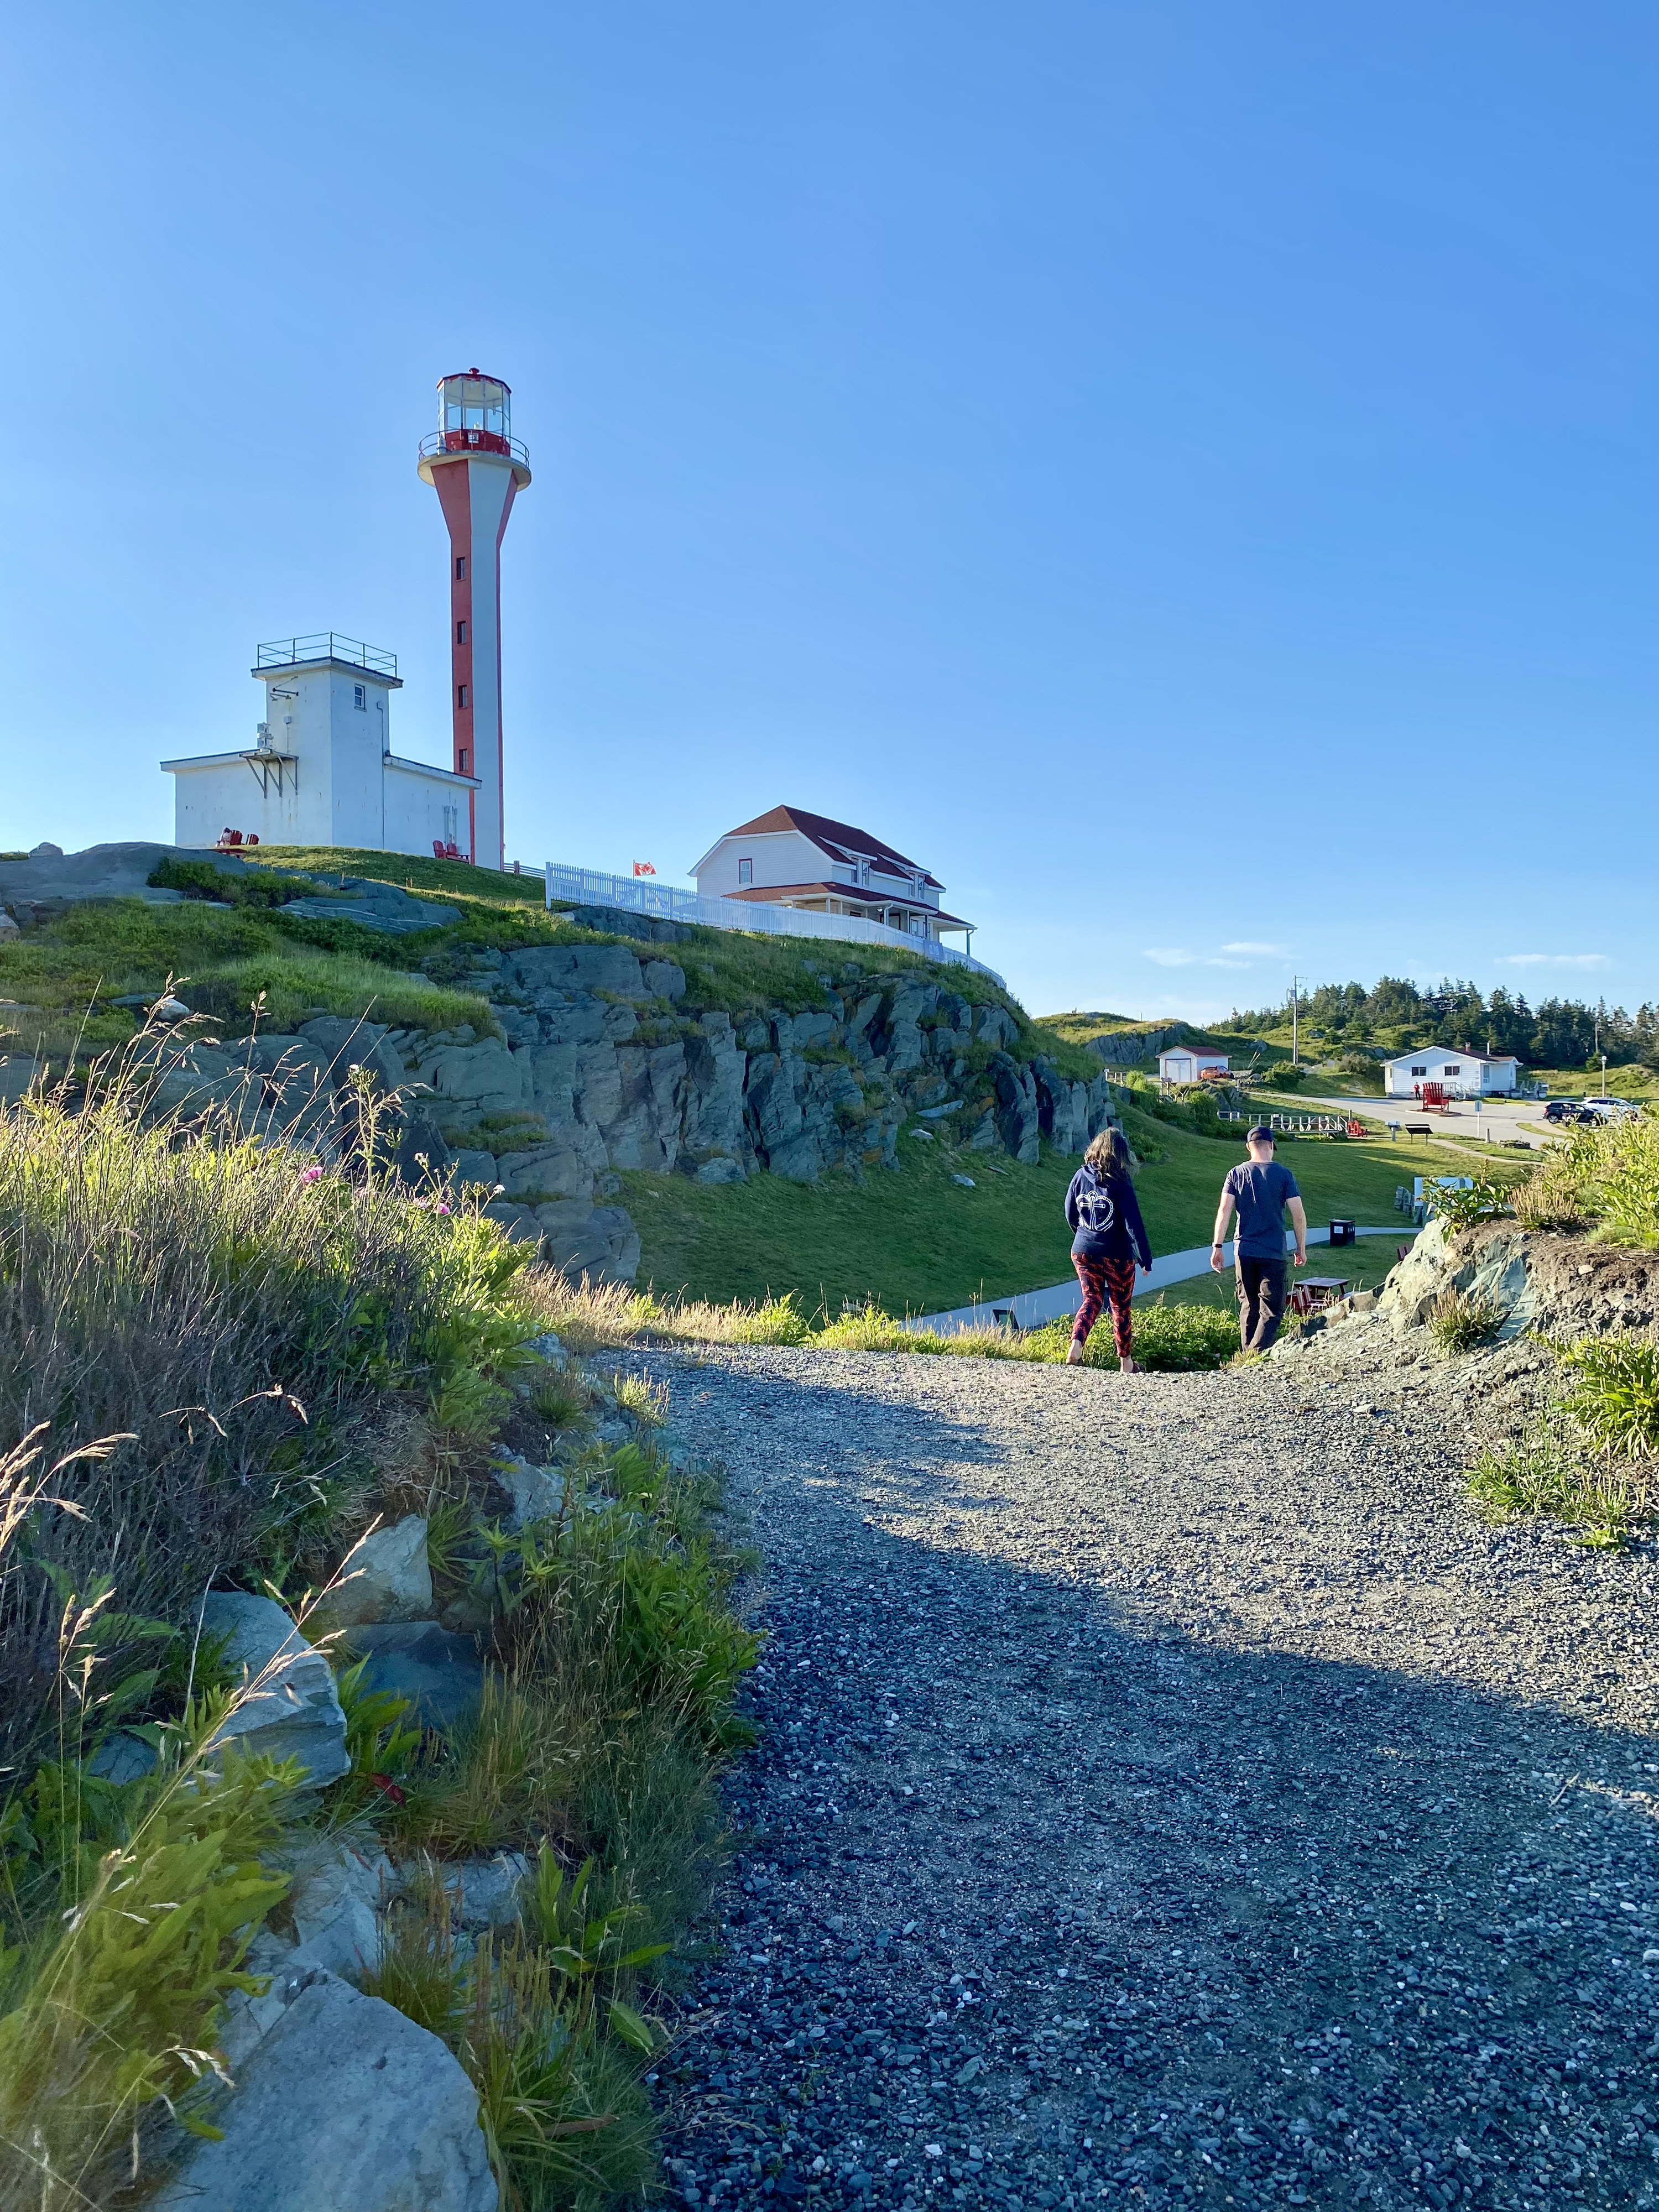 A man and woman walk along a gravel path with a lighthouse in the background